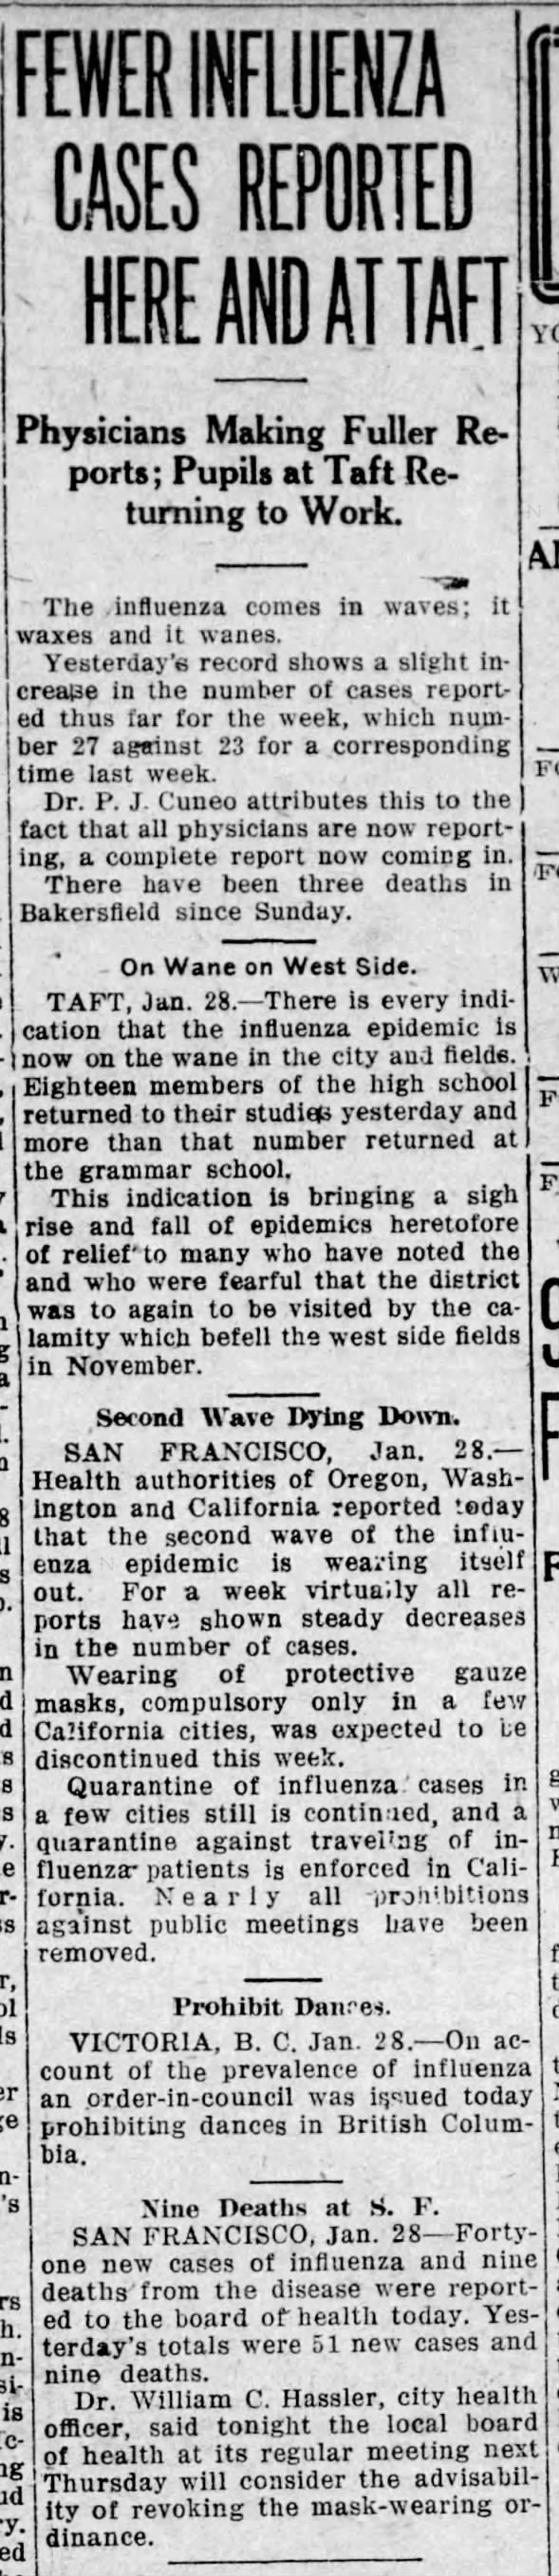 FEWER INFLUENZA CASES REPORTED HERE AND AT TAFT
spanish influenza